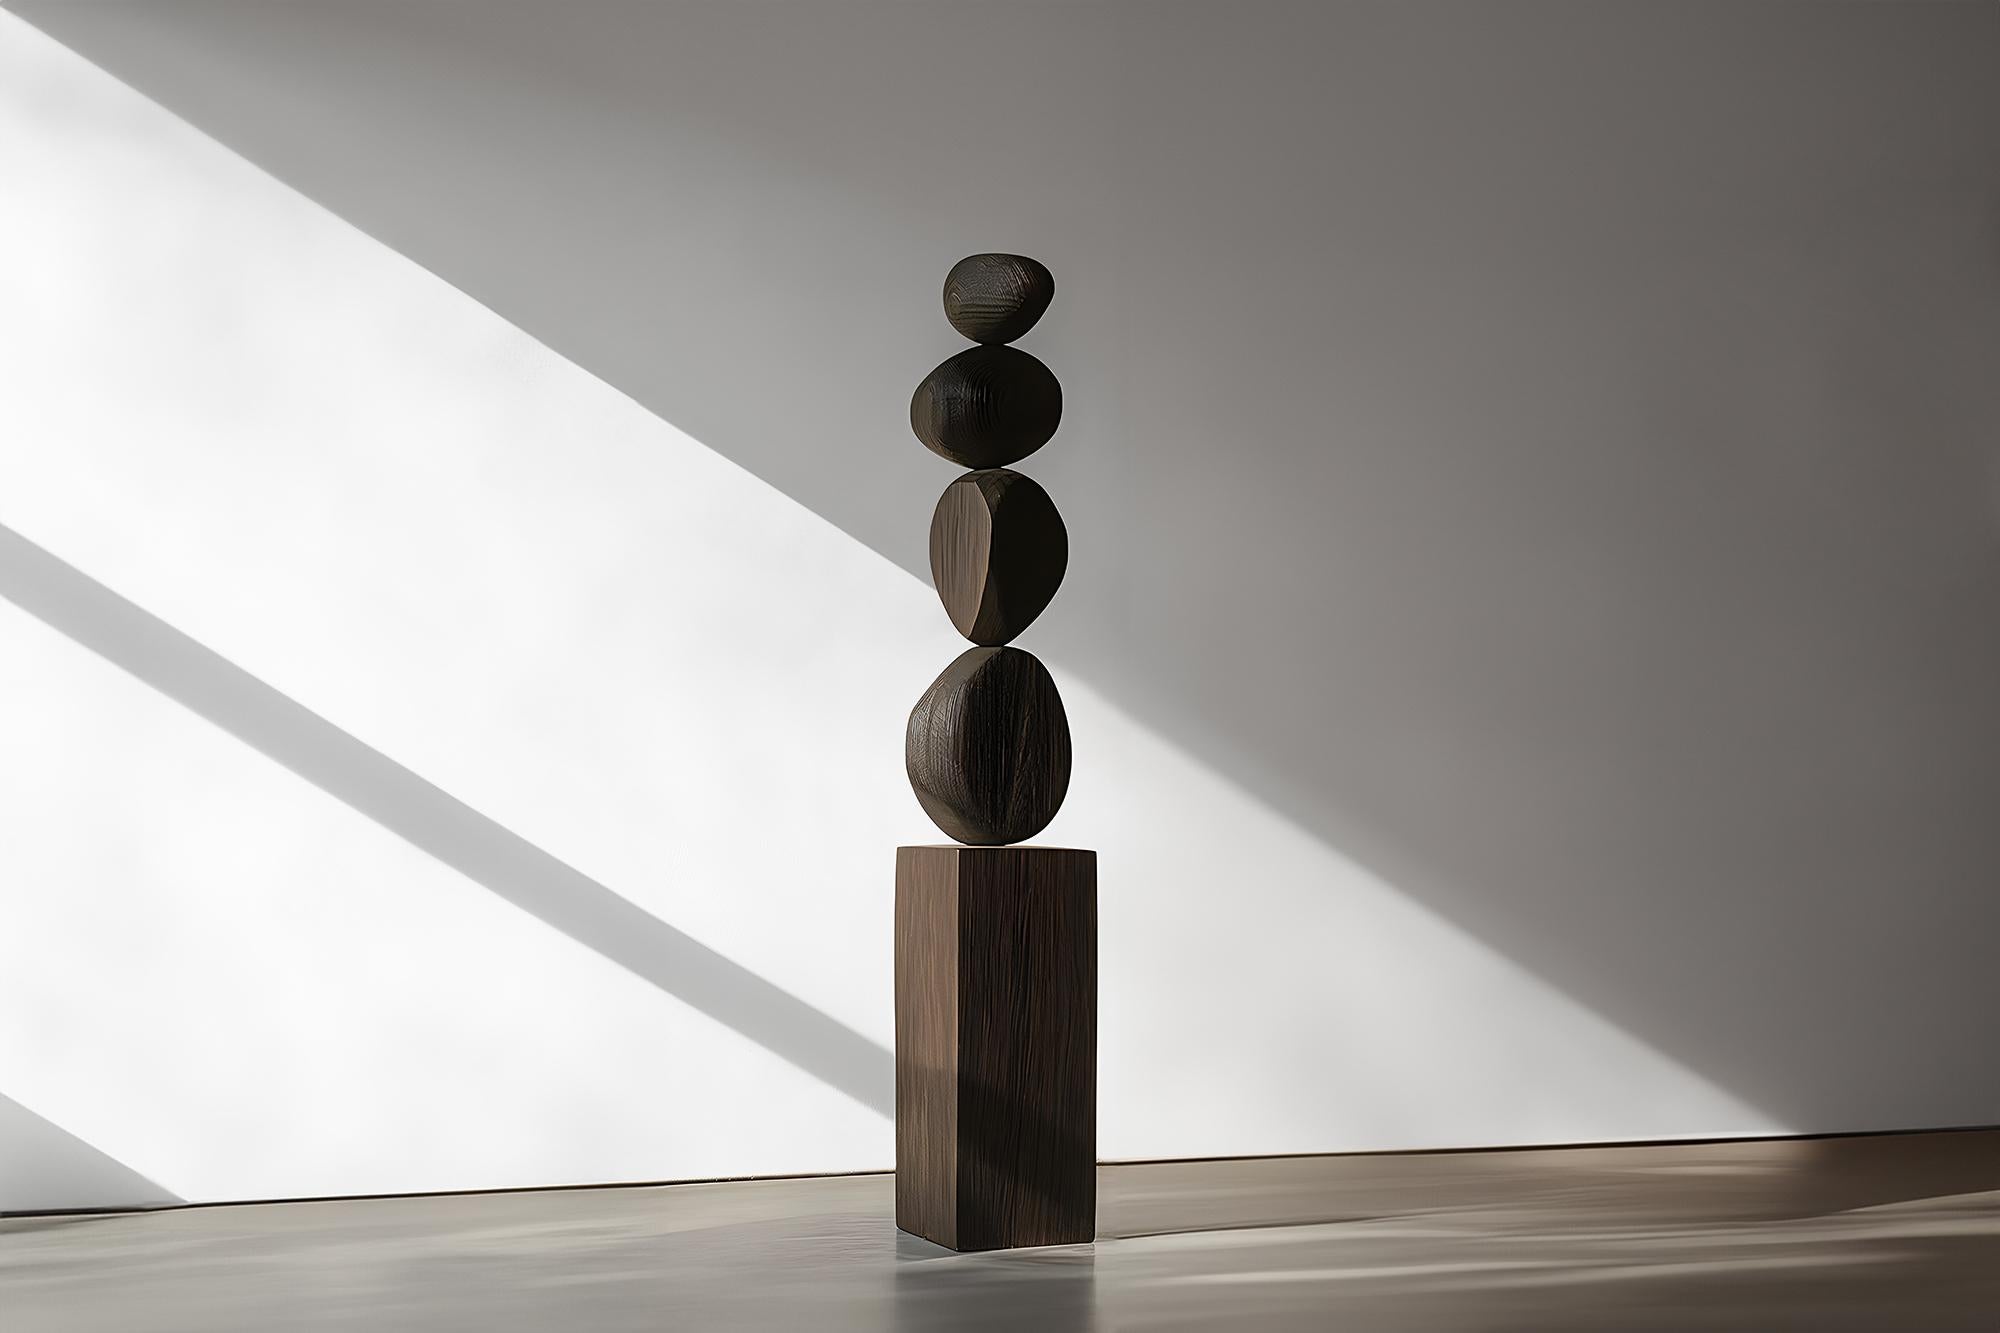 Modern Totem in Dark Elegance, Carved Burned Oak, Presented in Still Stand No95
_
Joel Escalona's wooden standing sculptures are objects of raw beauty and serene grace. Each one is a testament to the power of the material, with smooth curves that